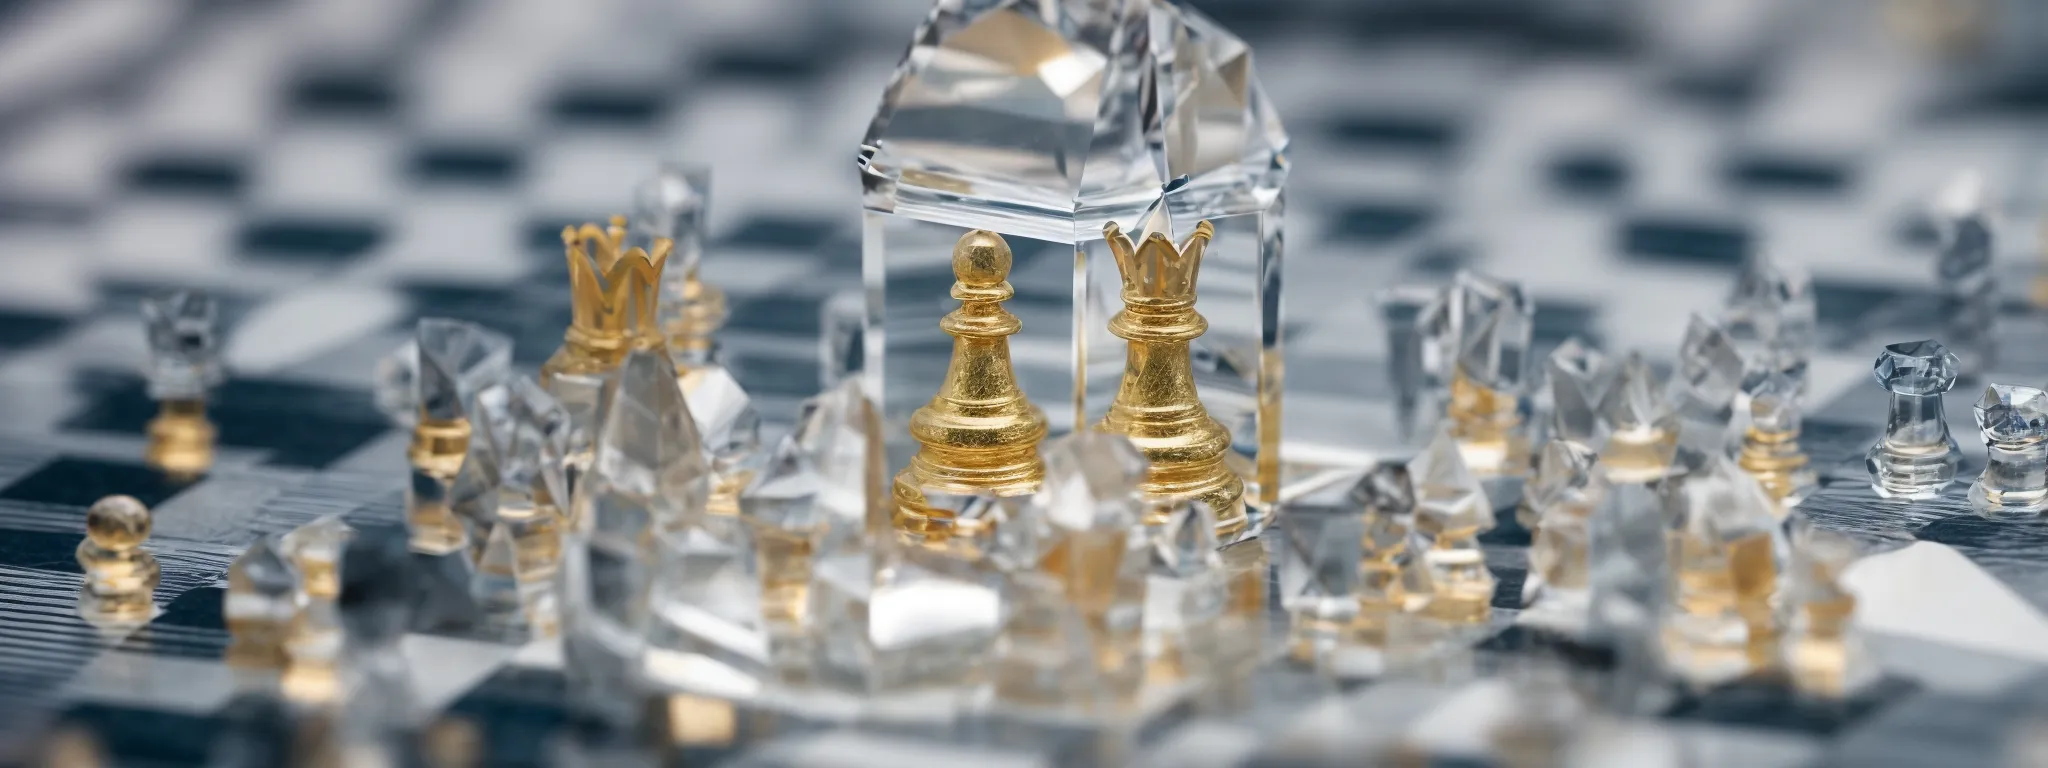 a close-up of a crystal-clear chess piece on a reflective surface amidst a myriad of blurred data charts and graphs.